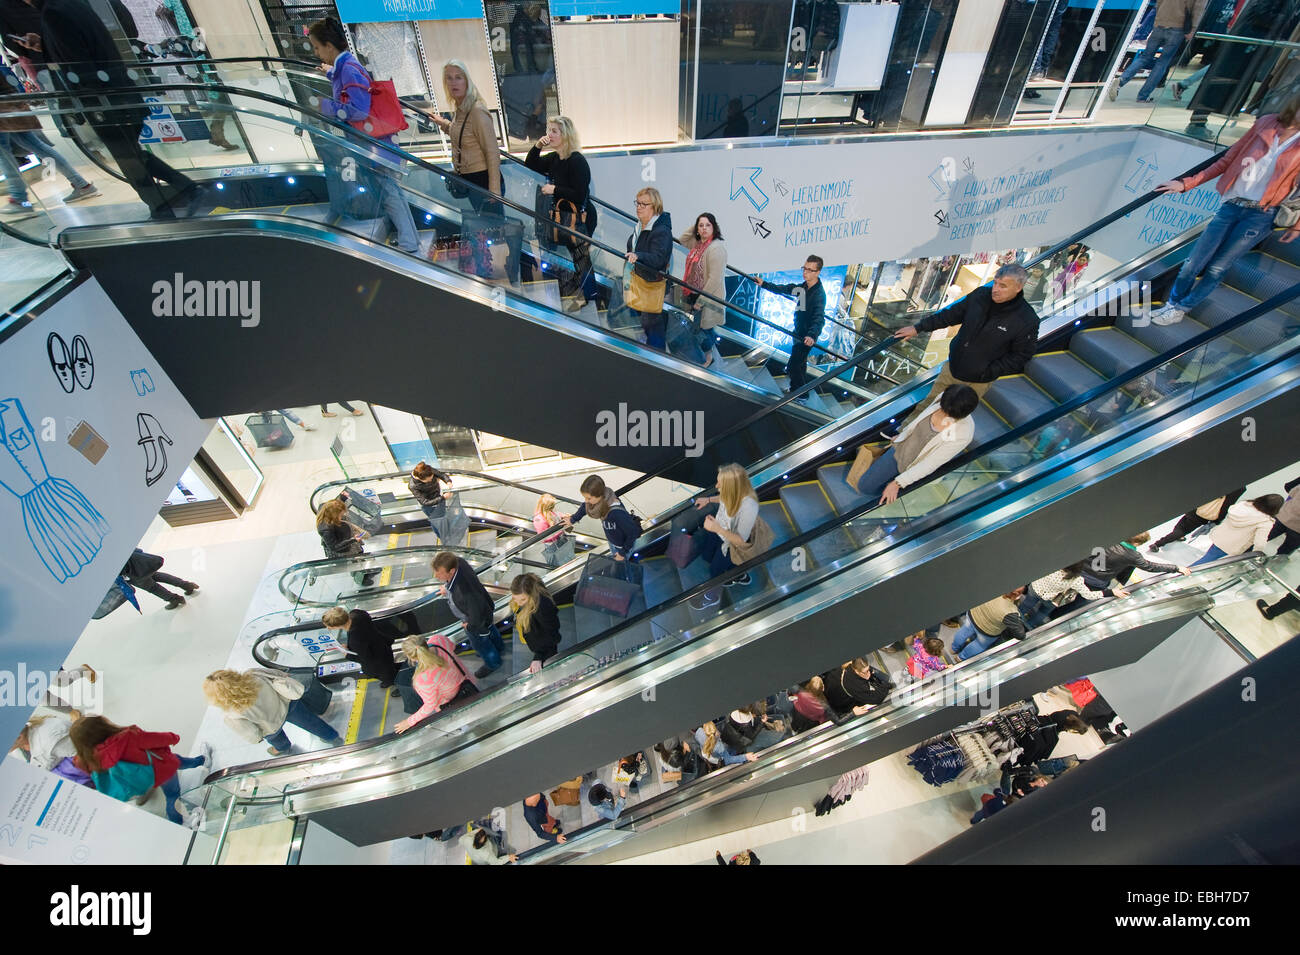 ENSCHEDE, NETHERLANDS -AUG 19, 2014: People are shopping in a new branch of warehouse Primark on the first day at the opening Stock Photo